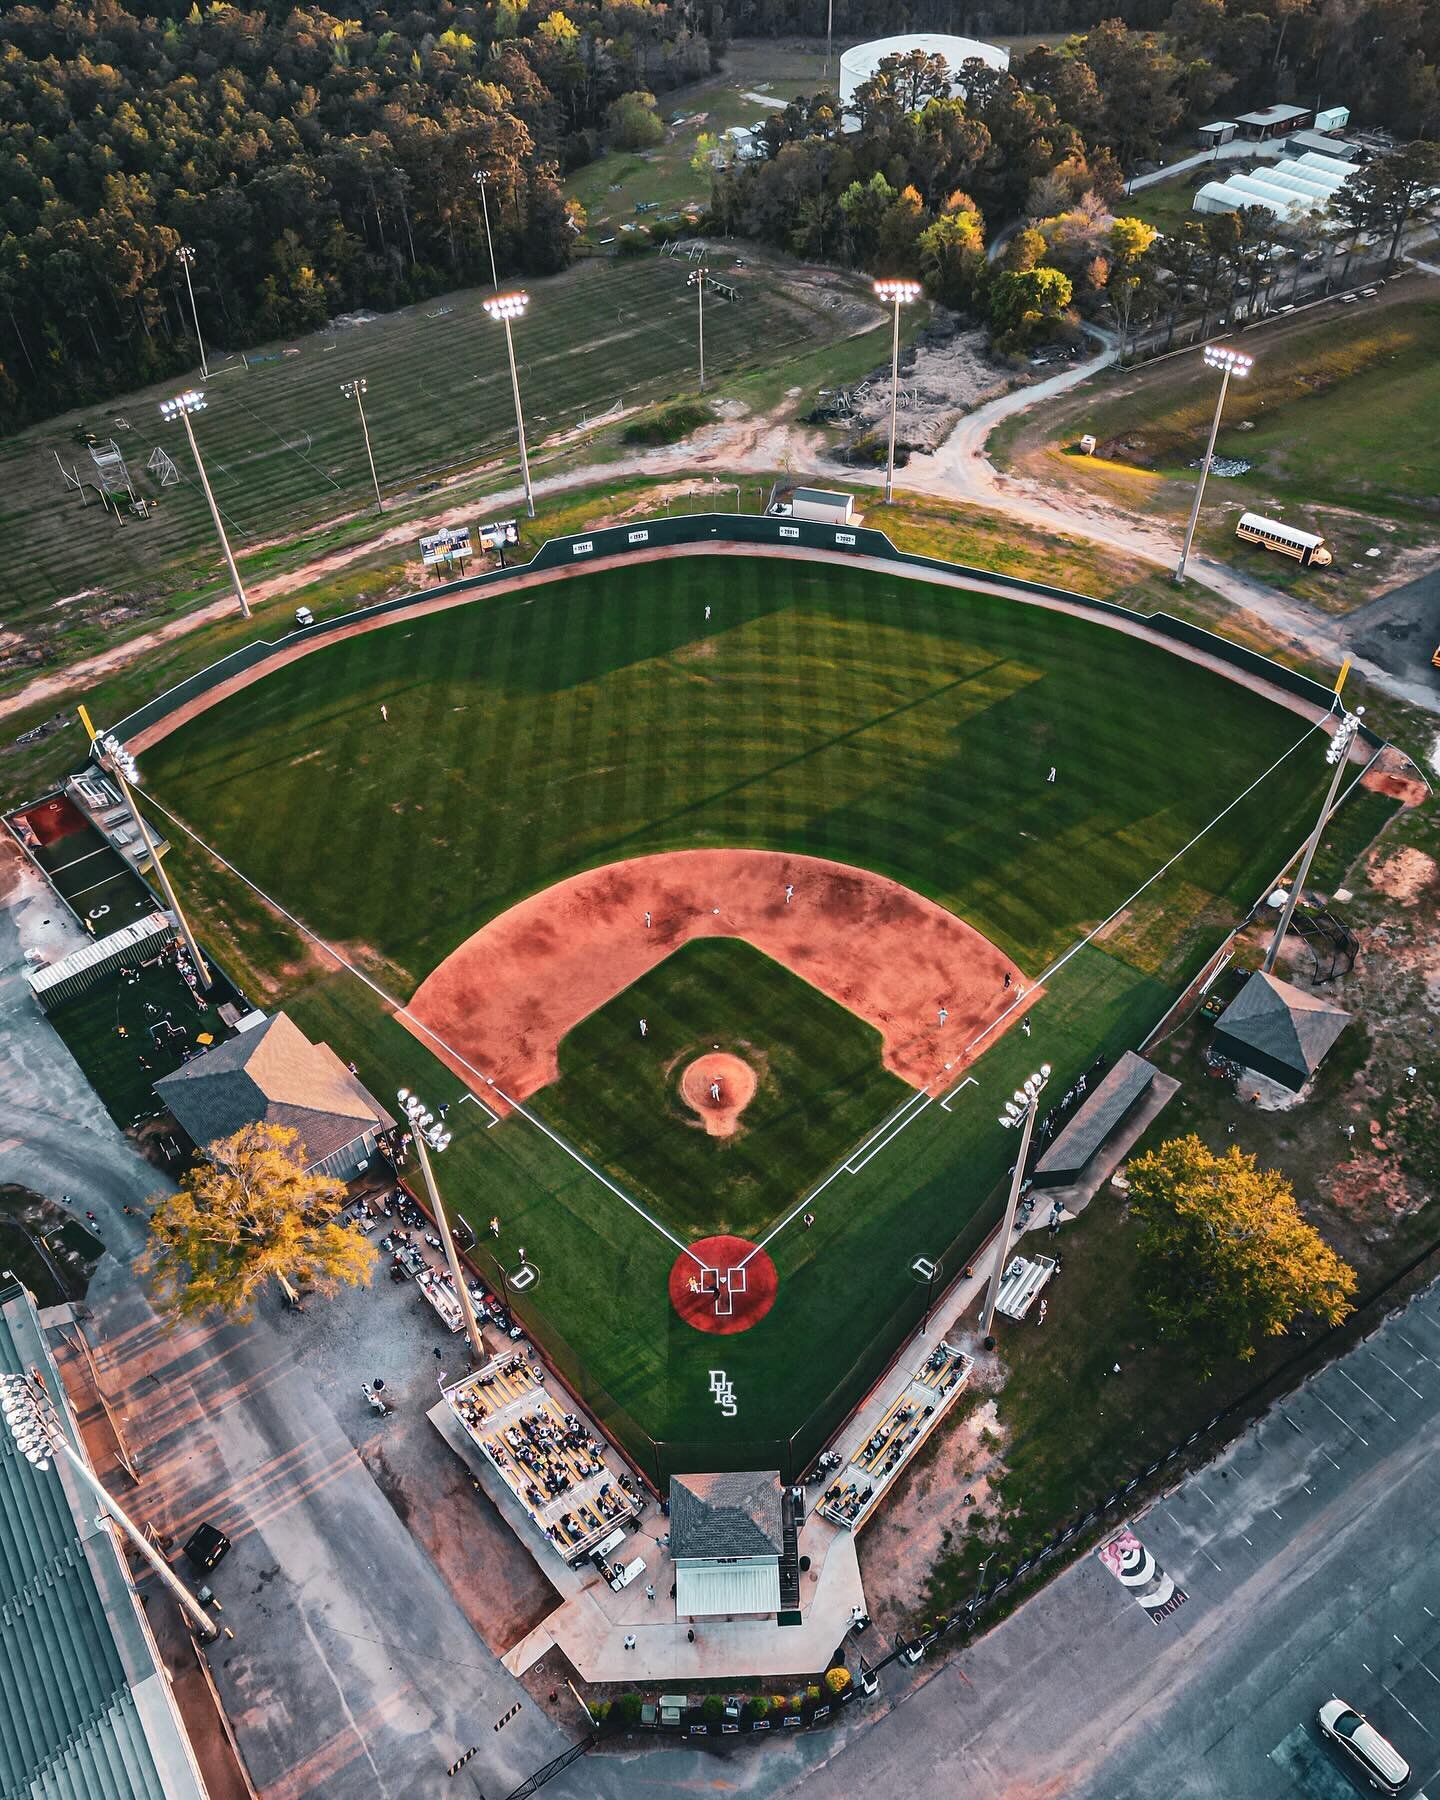 Livin the dream one shot at a time. #dronephotography #djimini3pro @daphnebaseball game. Saturday night sunsets.